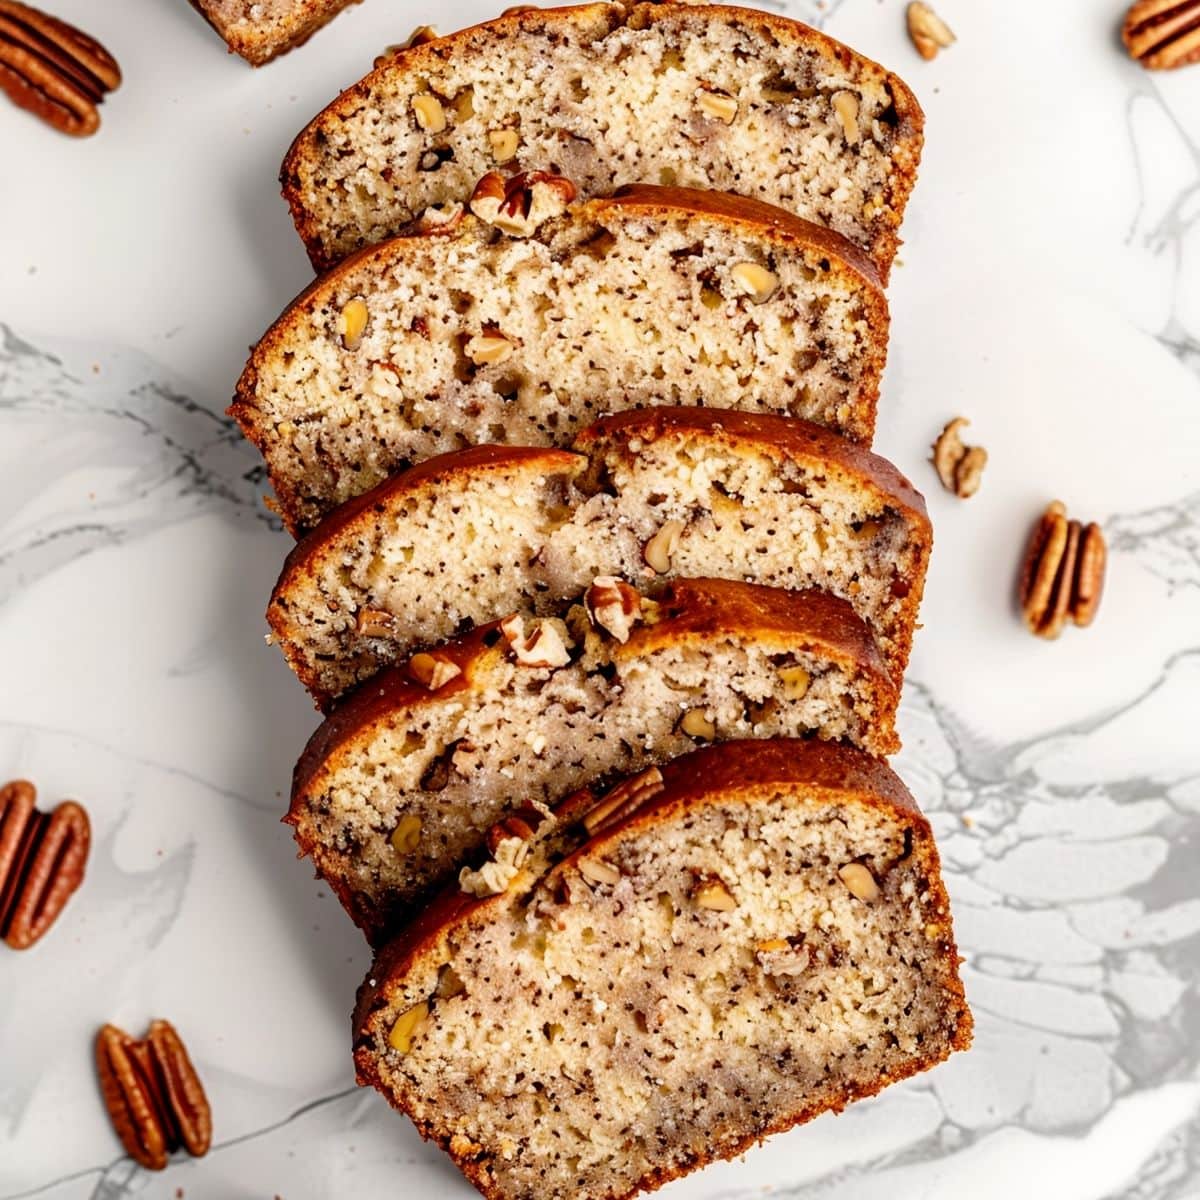 Ina Garten's Banana Bread Slices on a White Marble Table with Pecans